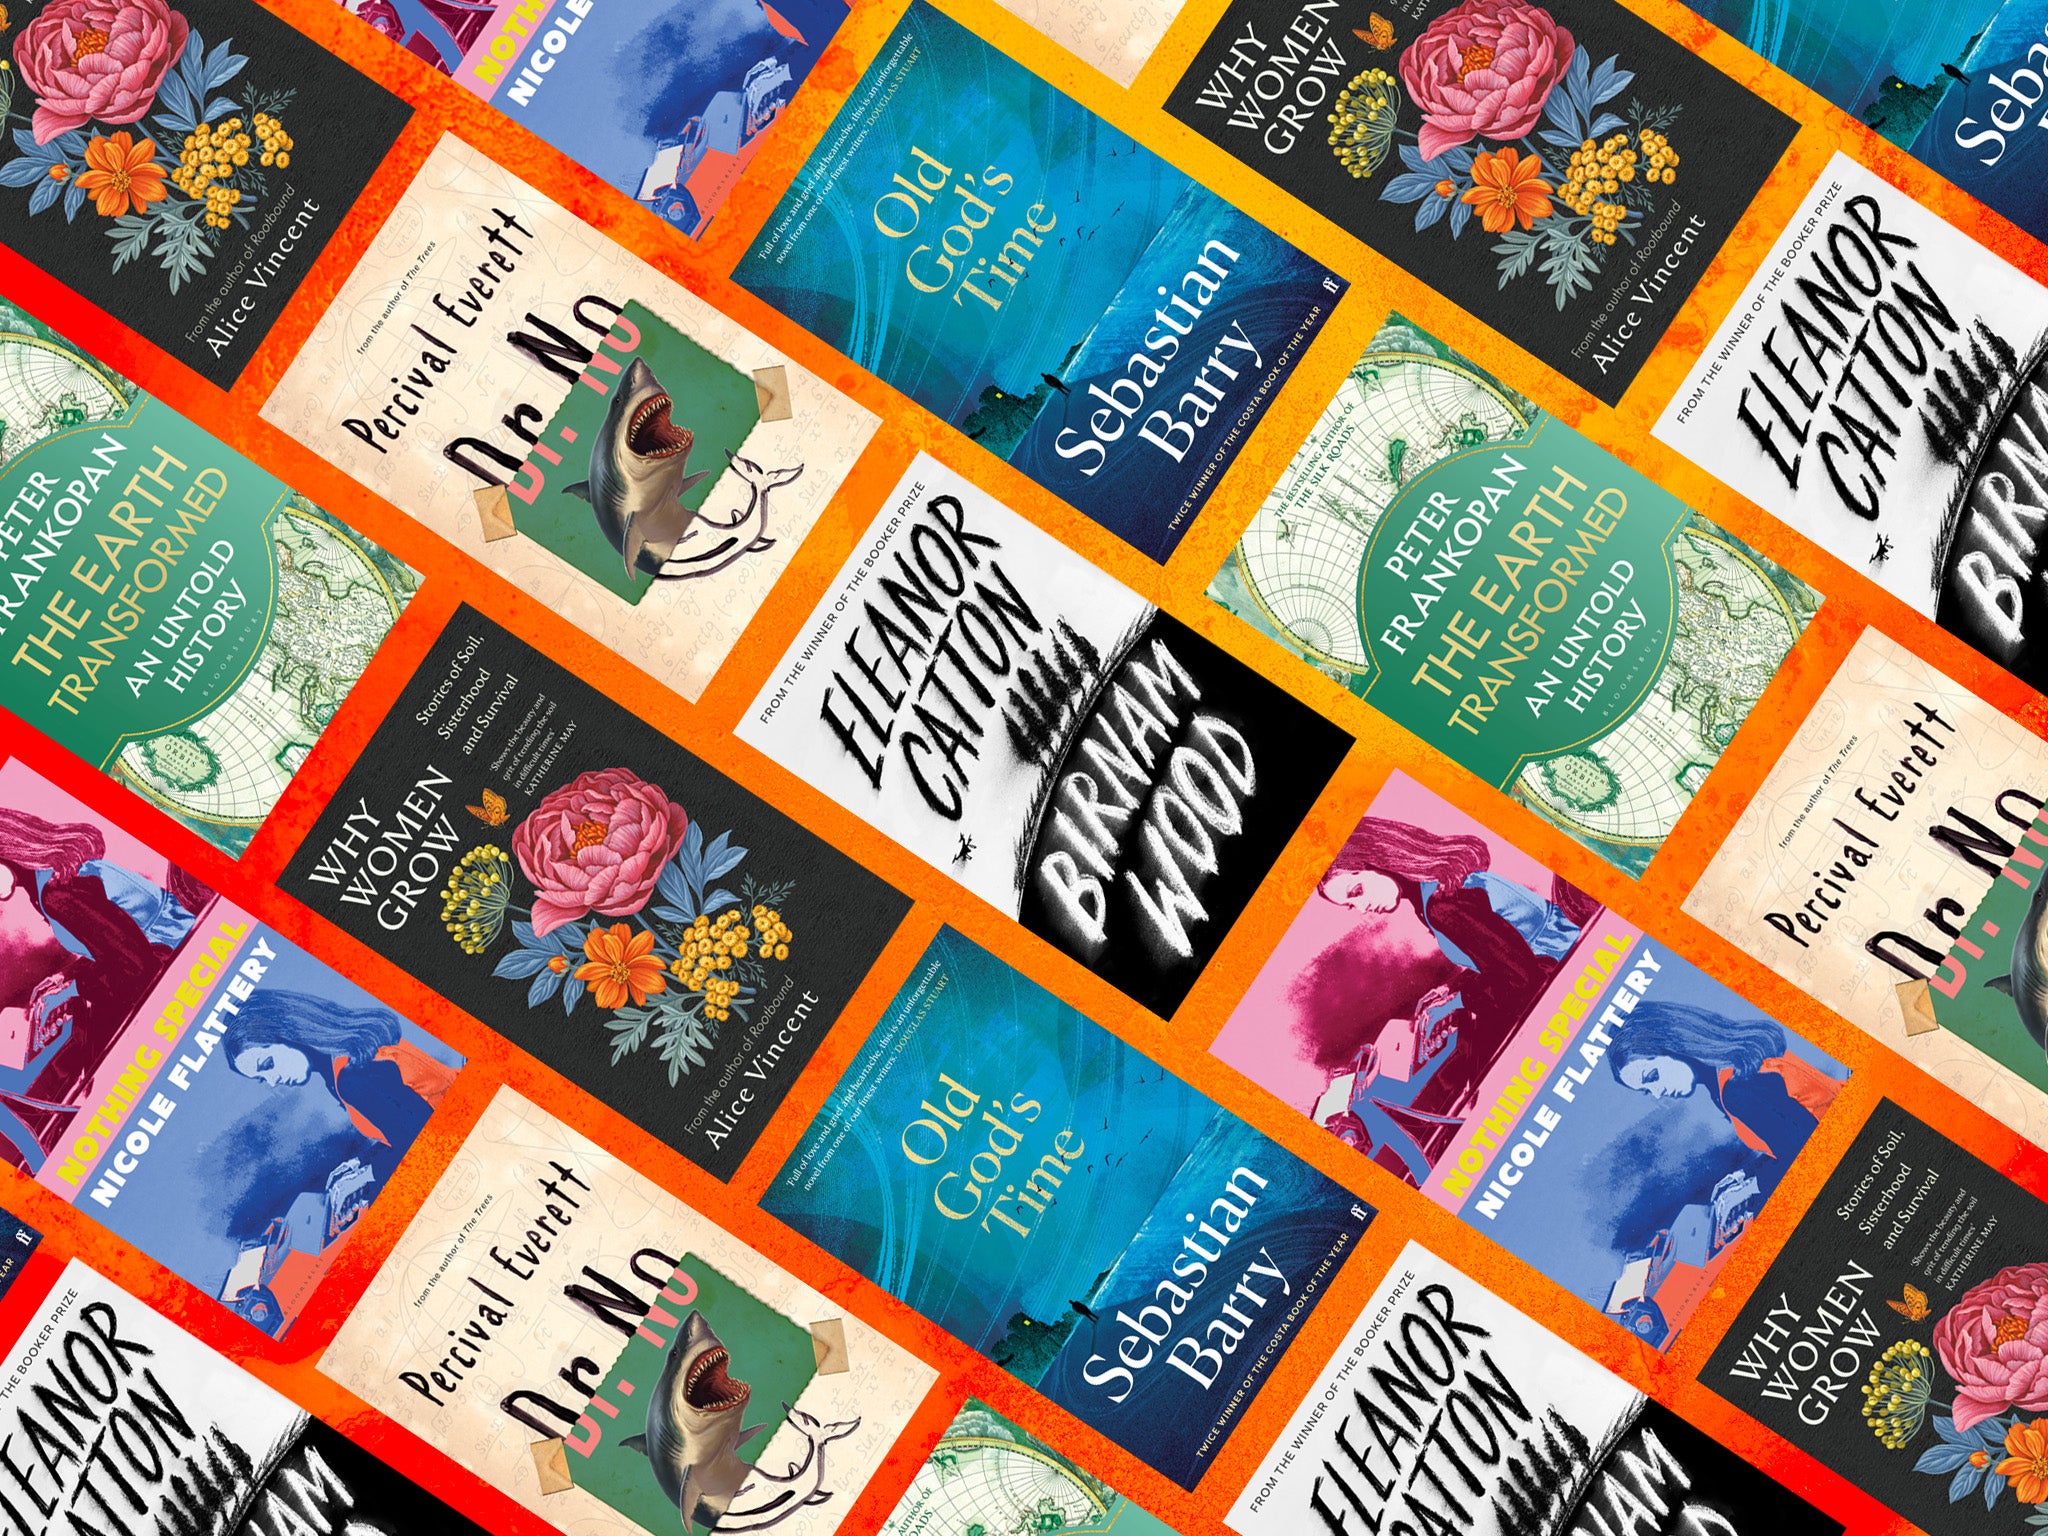 A selection of the most exciting books set for release this month